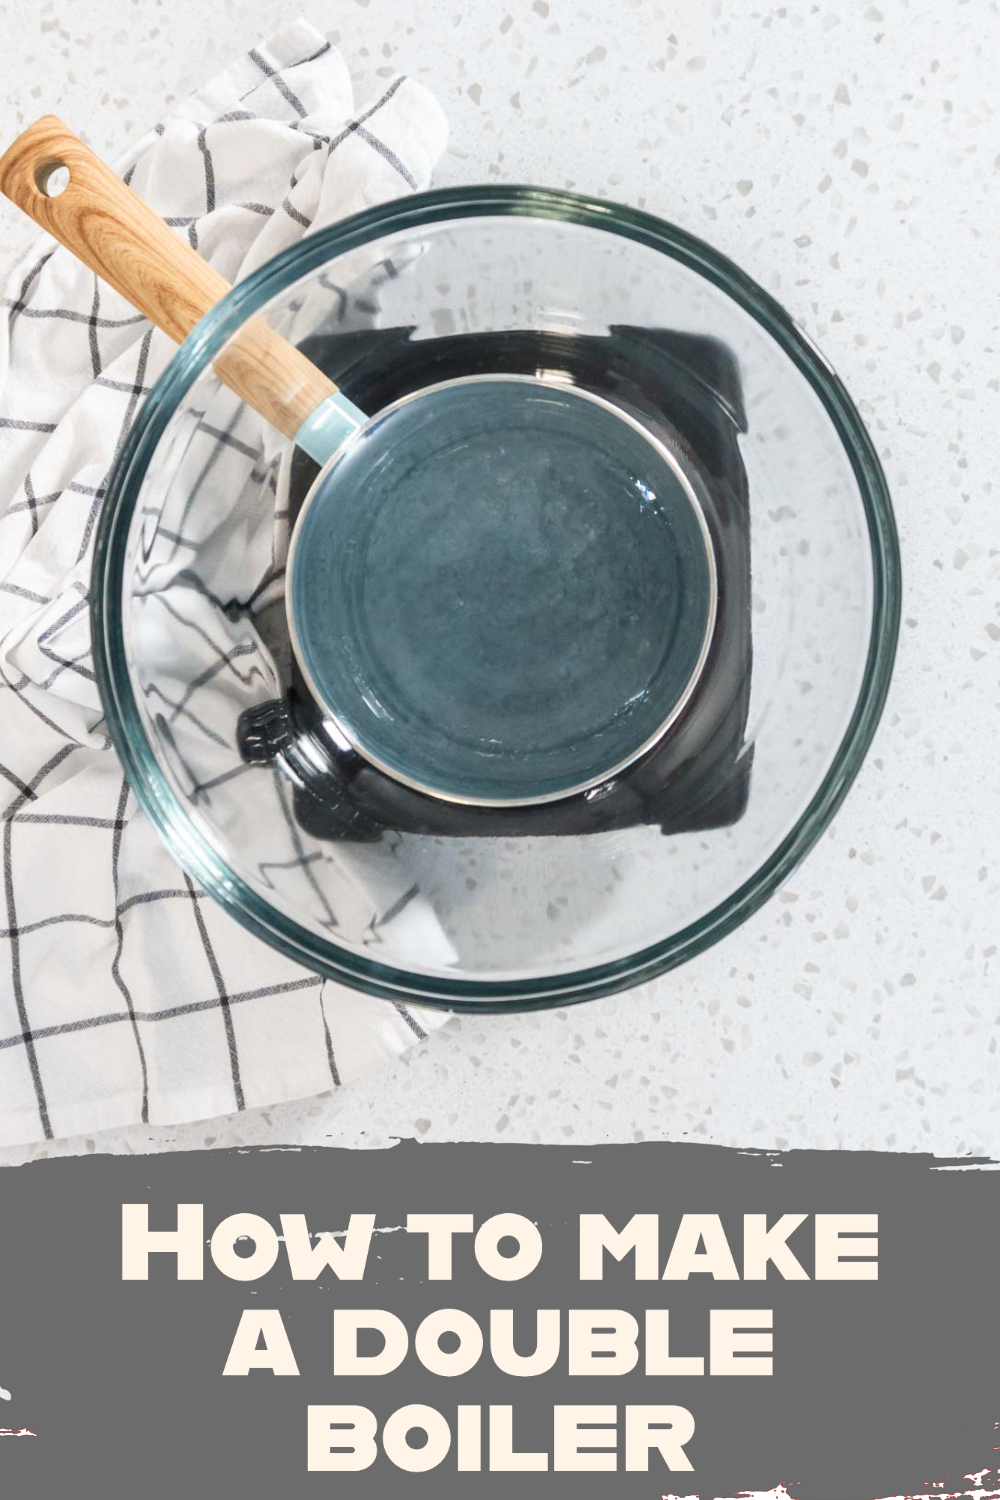 How to make a double boiler